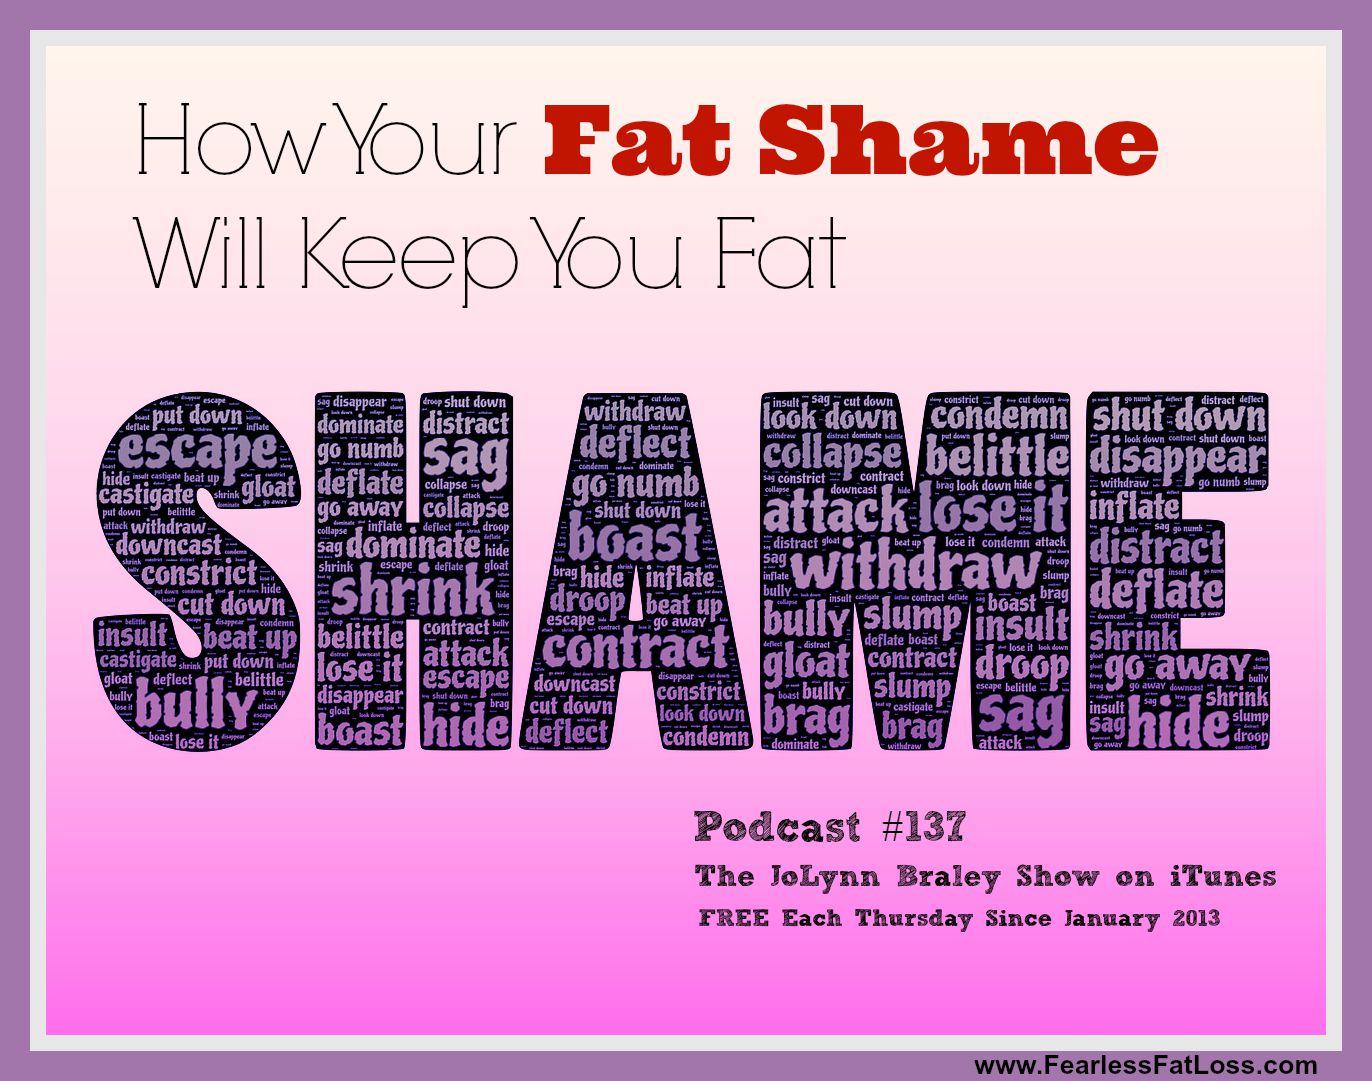 How Your Fat Shame Will Keep You Fat [Podcast #137]